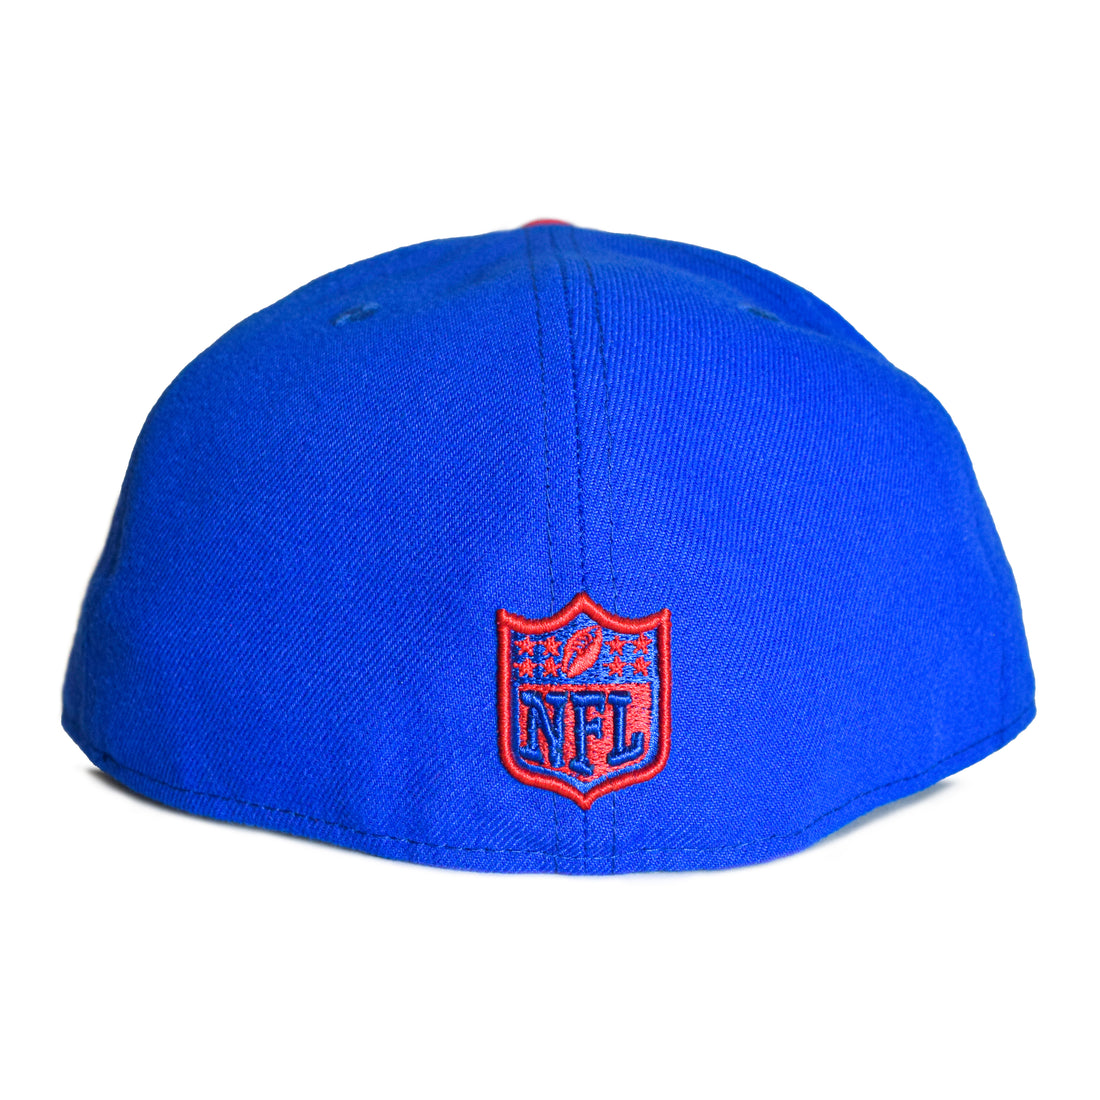 New Era Buffalo Bills 2Tone 59Fifty Fitted - Blue/Red